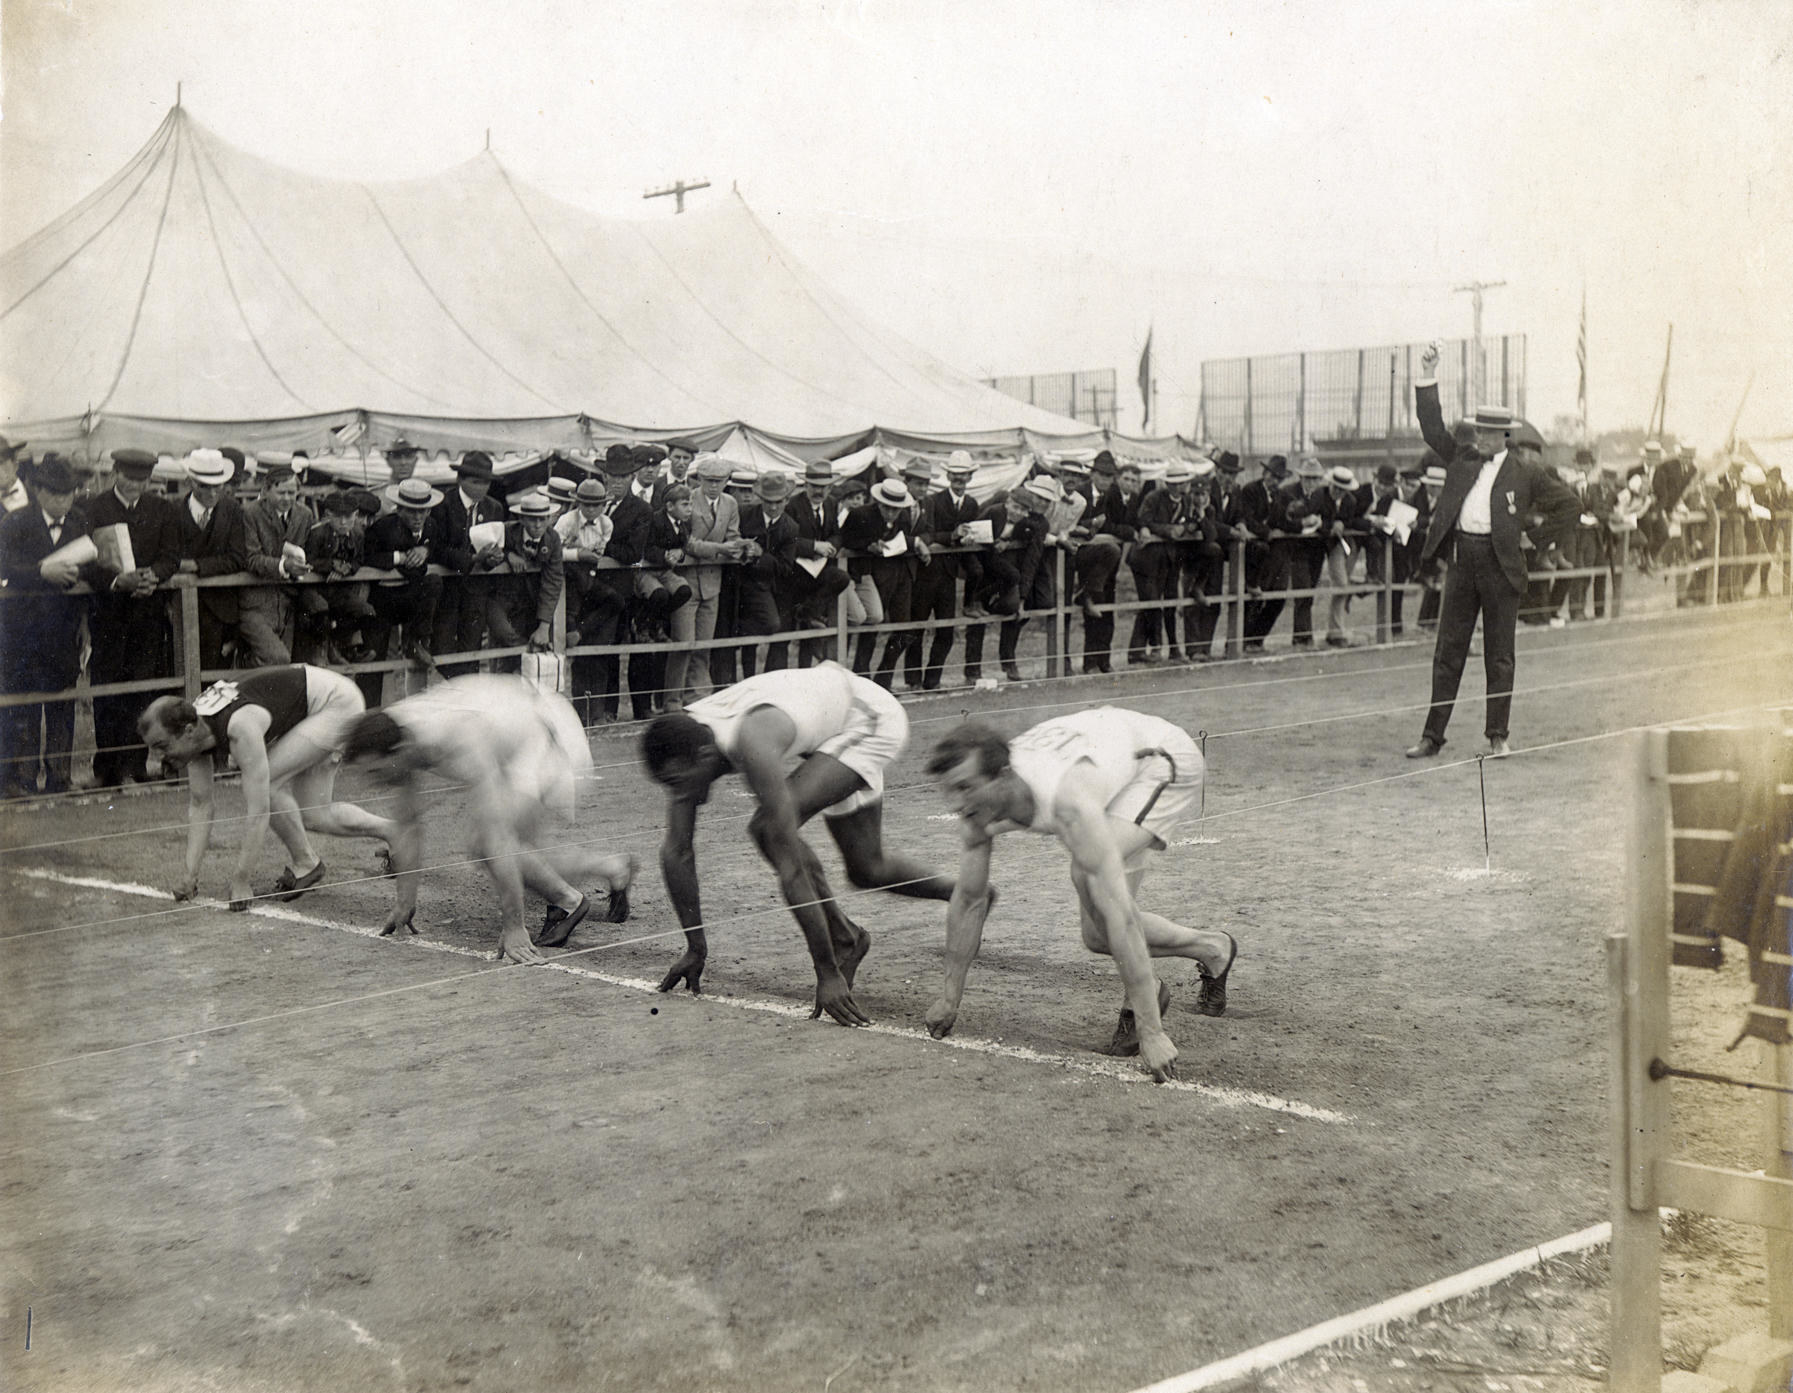 Meyer Prinstein, George Poage, Clyde Blair, and William Hunter at the 1904 Olympics